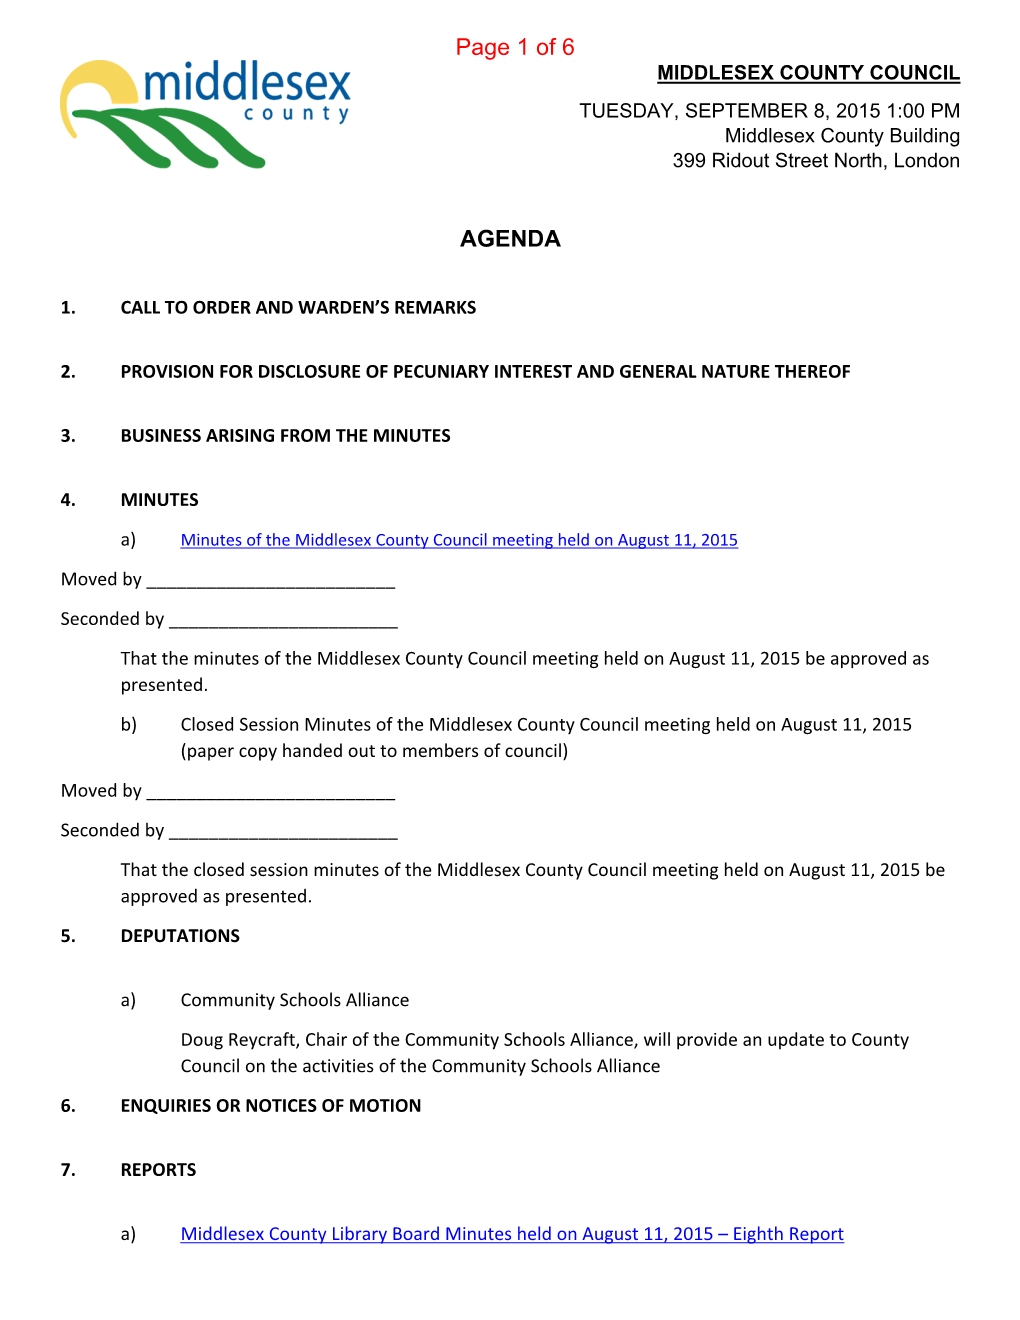 AGENDA Page 1 of 6